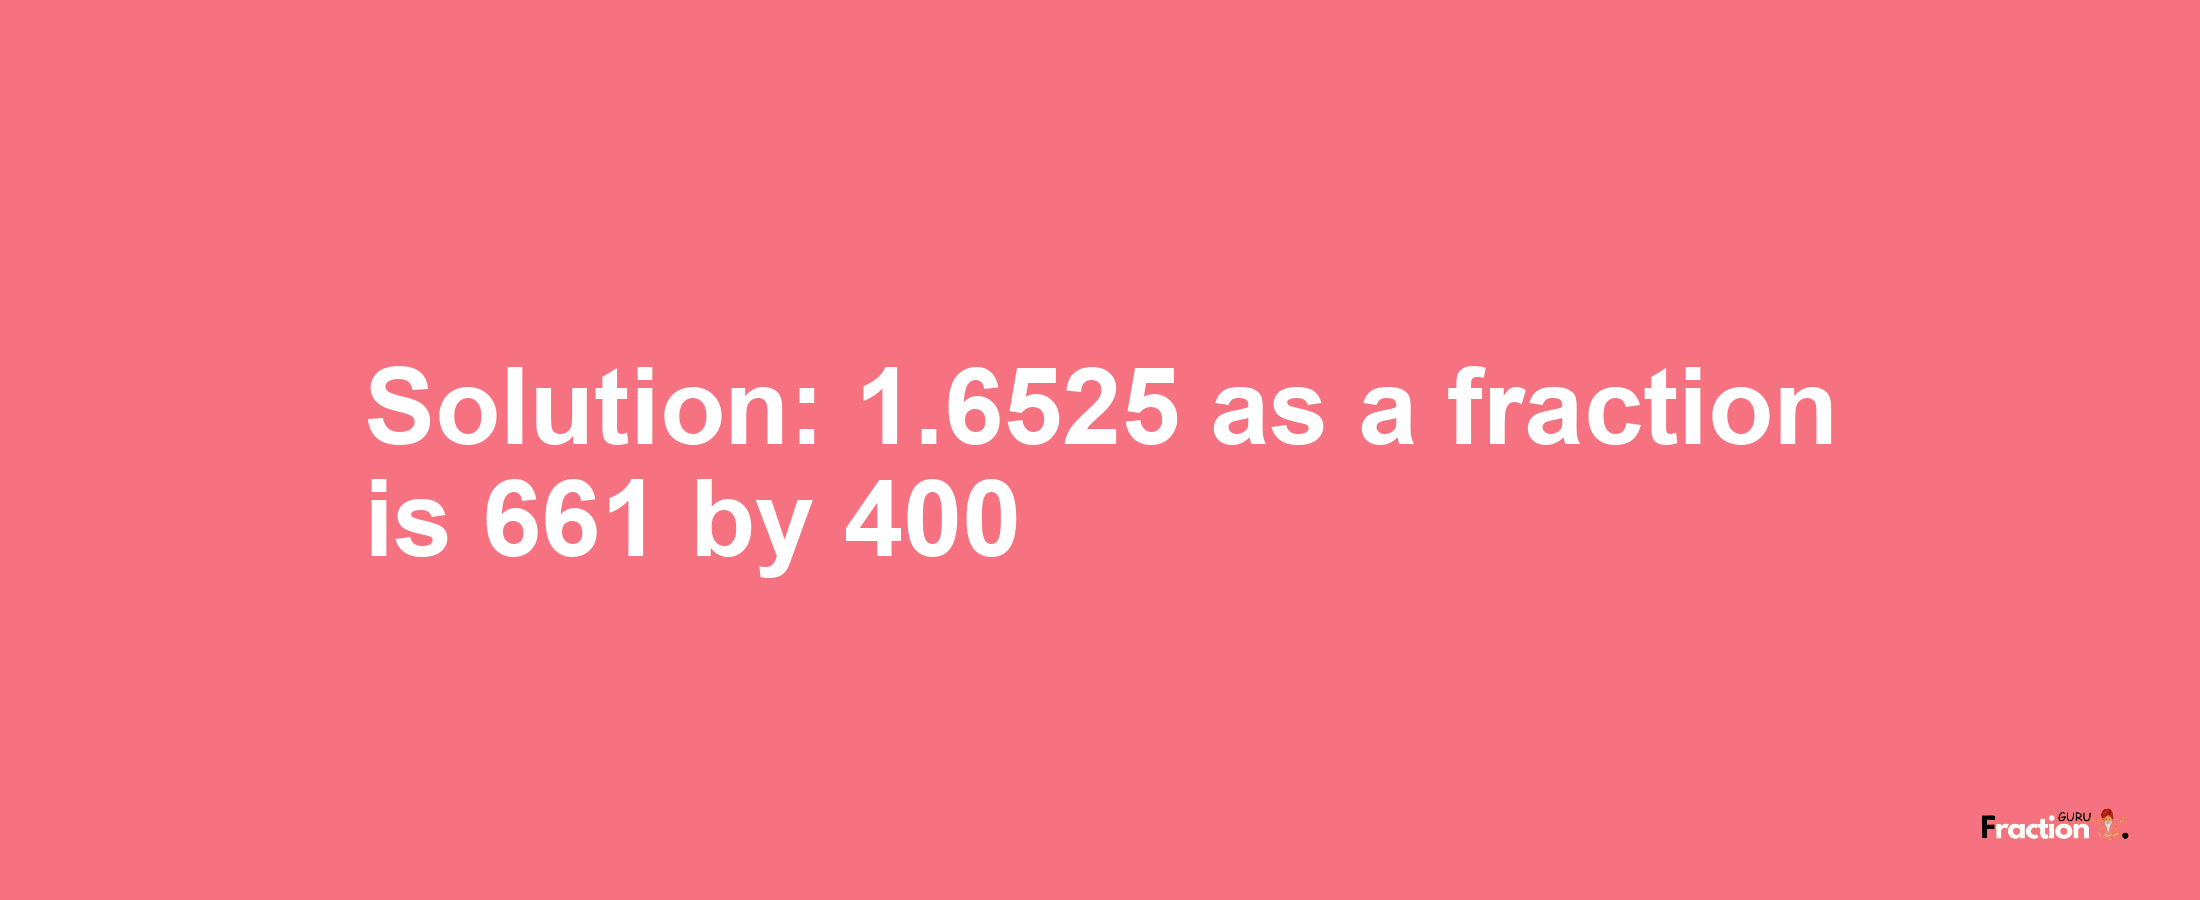 Solution:1.6525 as a fraction is 661/400